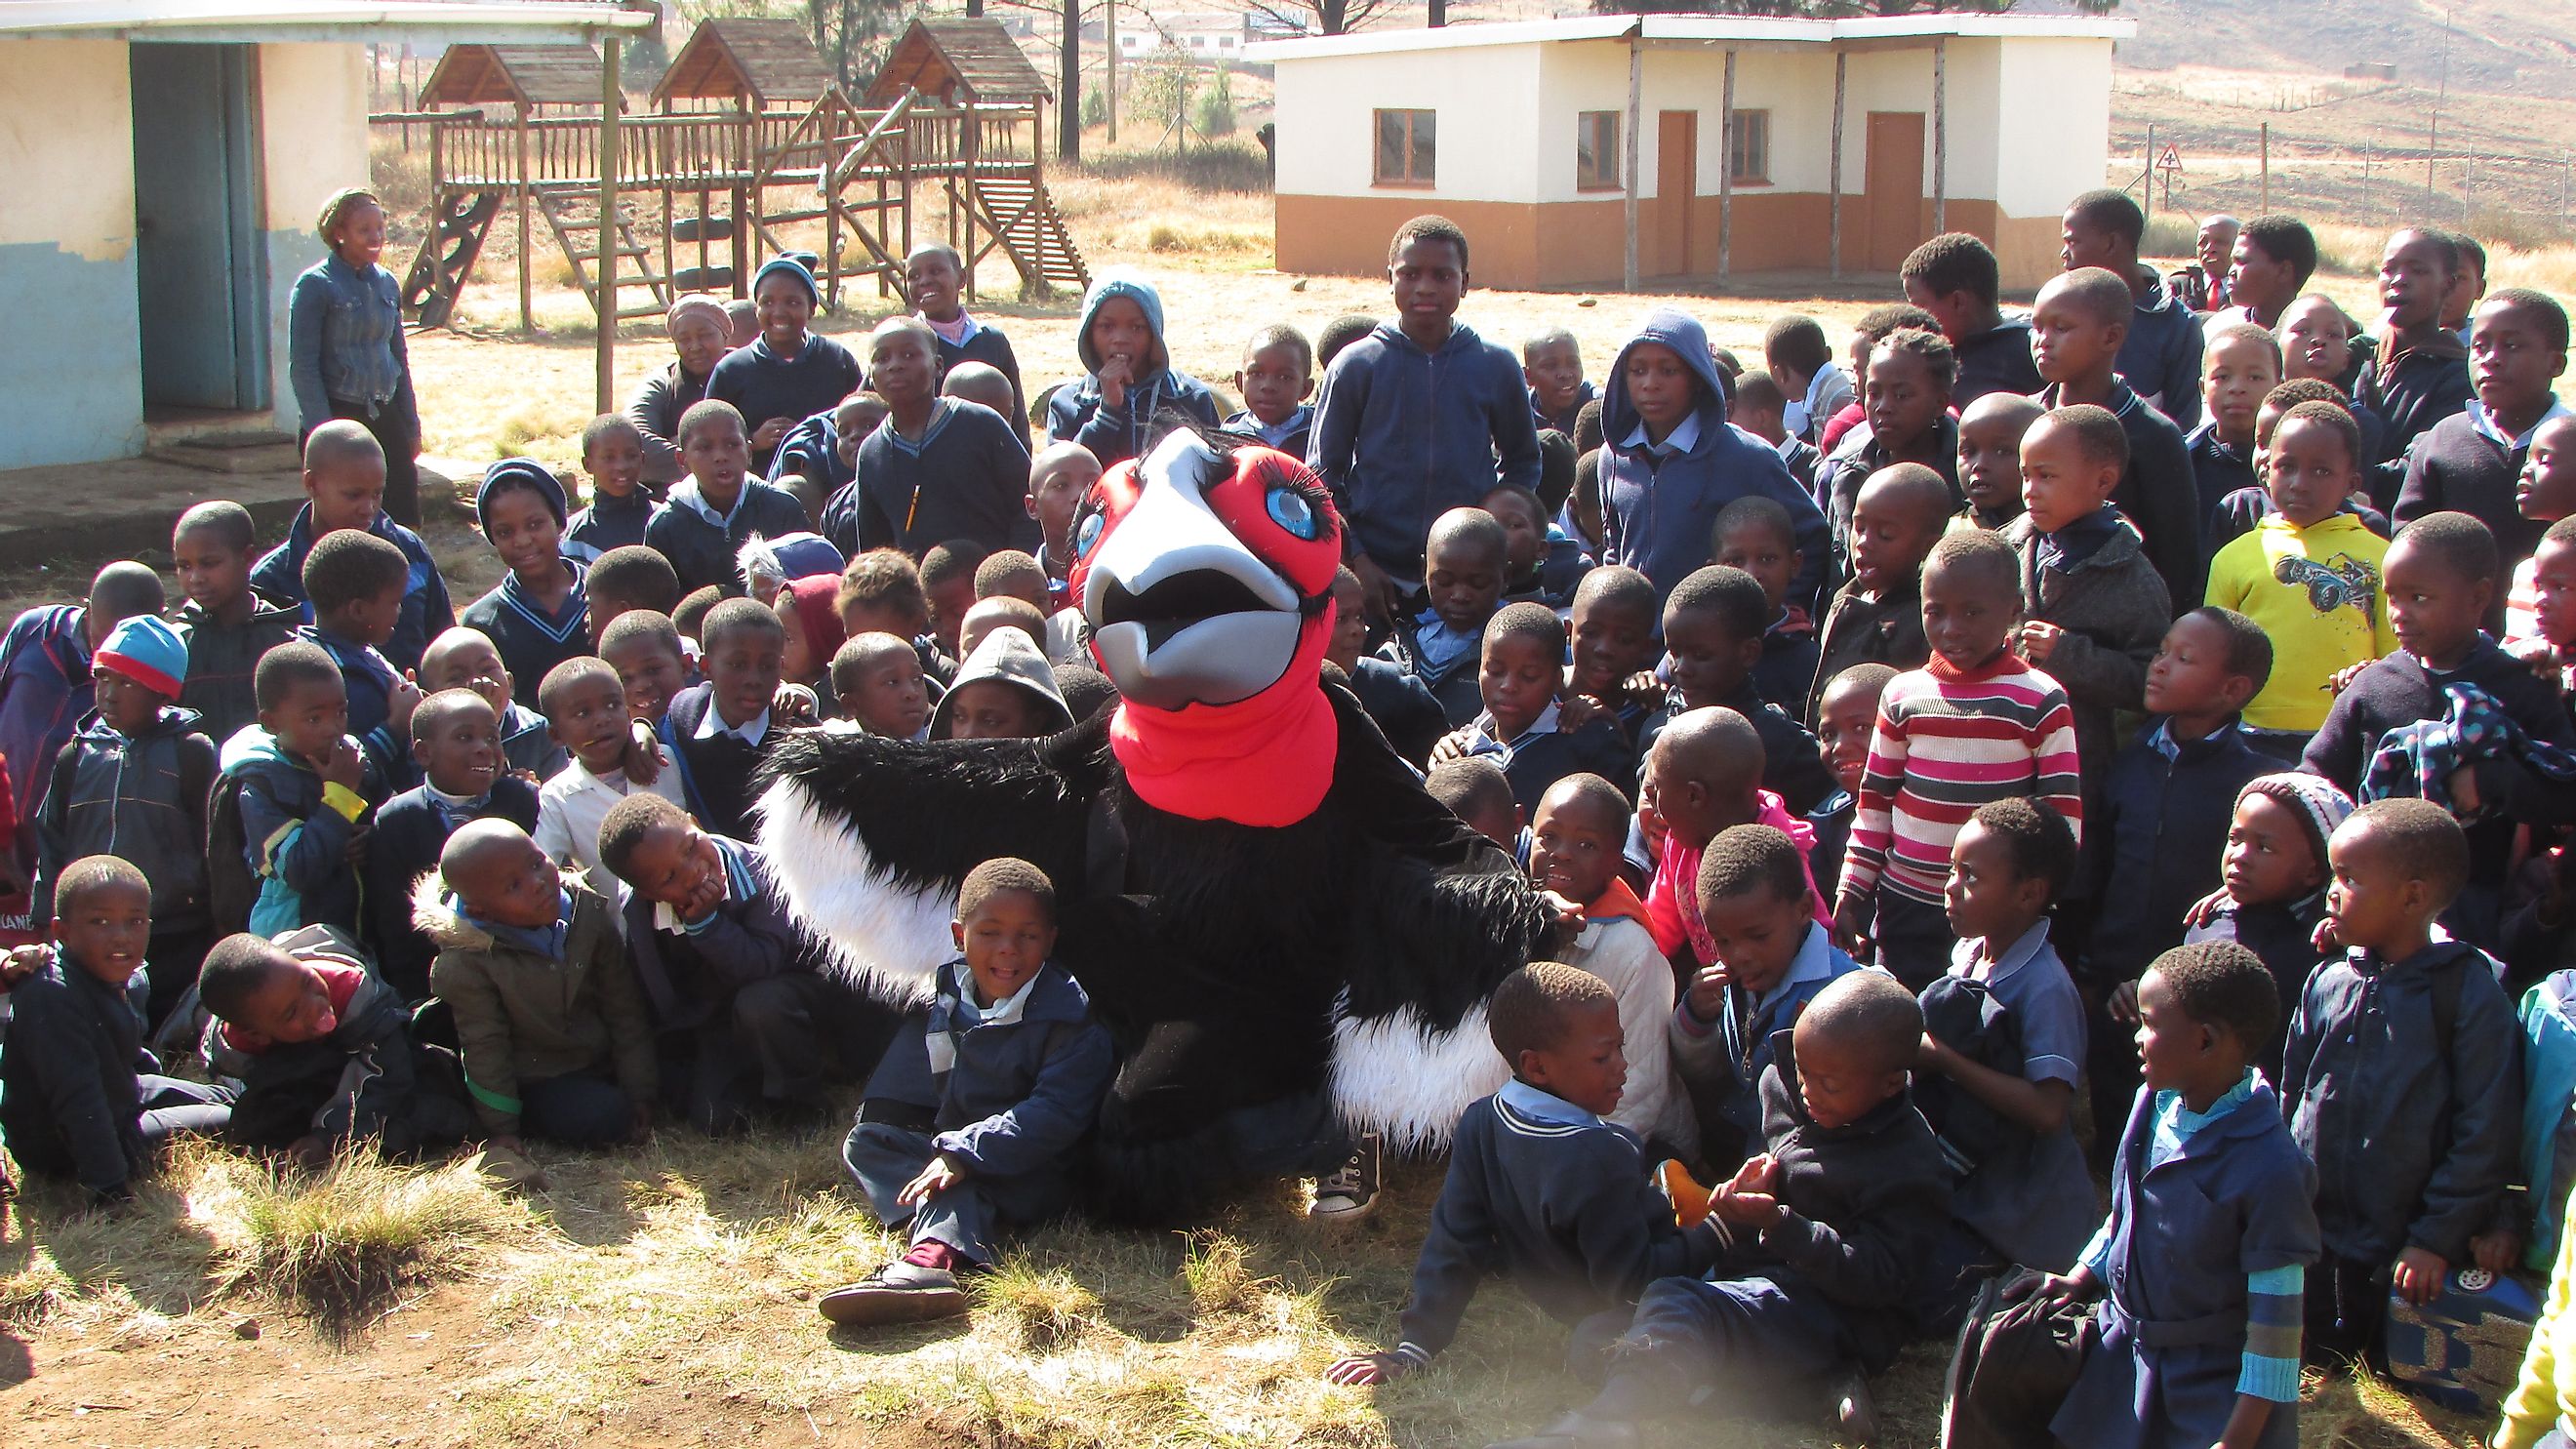 Educational program by Mabula Ground Hornbill Project to raise awareness about the conservation of Southern ground hornbills in Africa. Image by: ©NthabisengMonama 